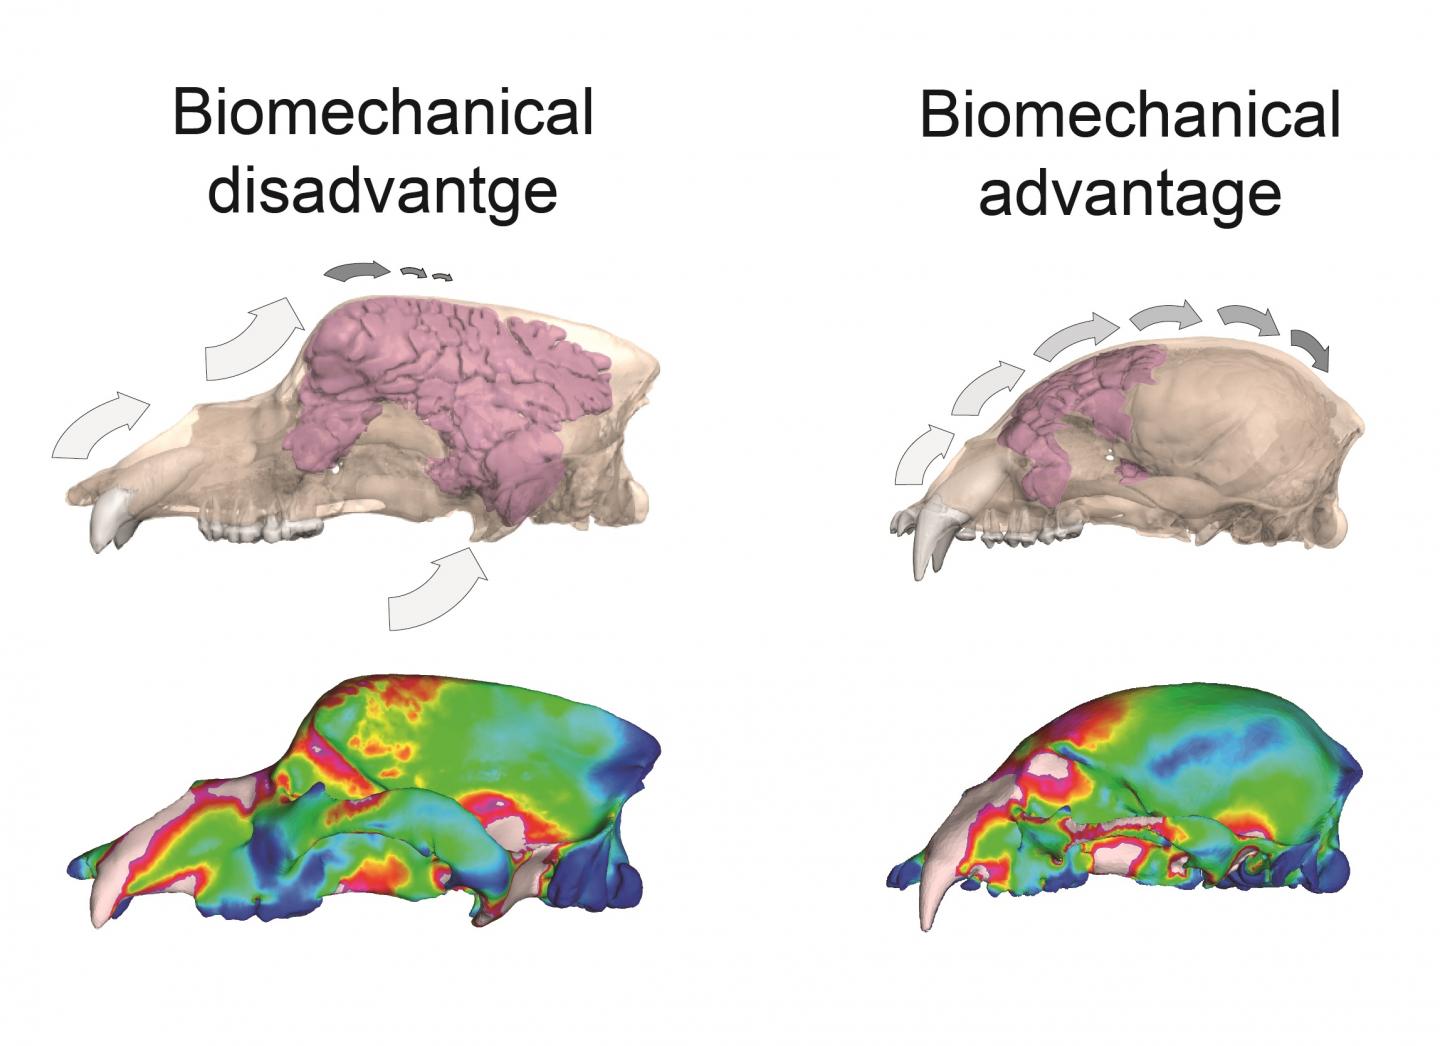 Biomechanical Advantage and Disadvantage of Different Sinus Systems